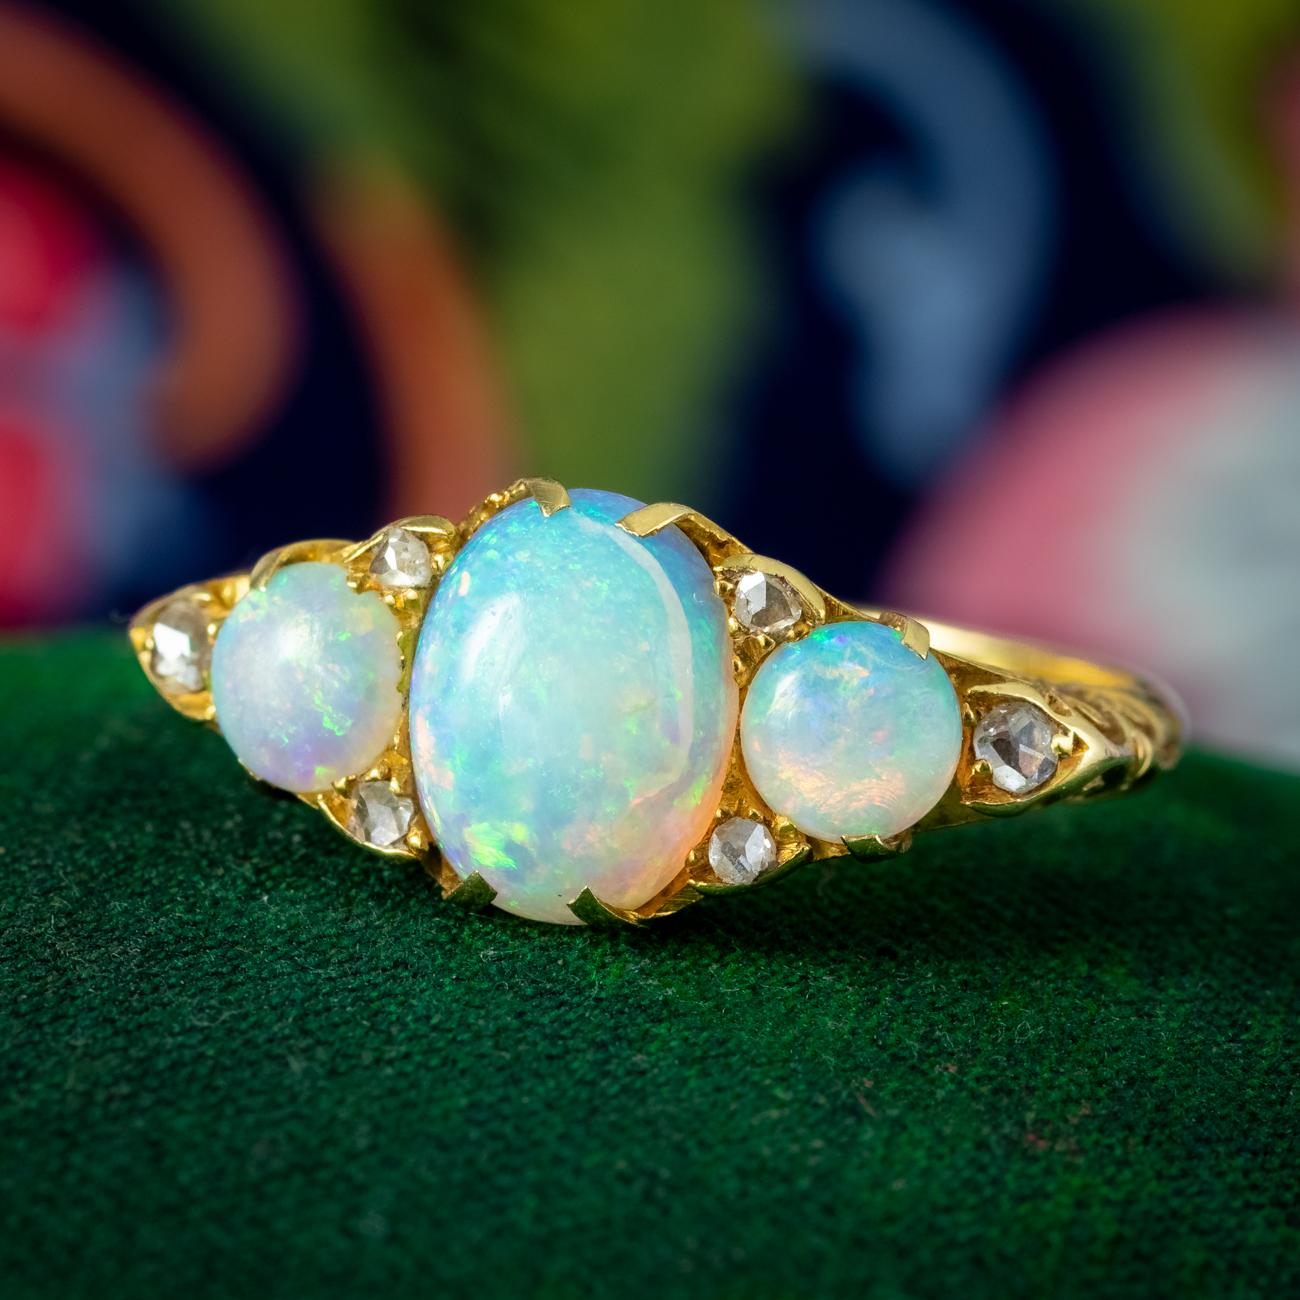 Antique Edwardian Opal Diamond Ring 2.5ct of Opal For Sale 1